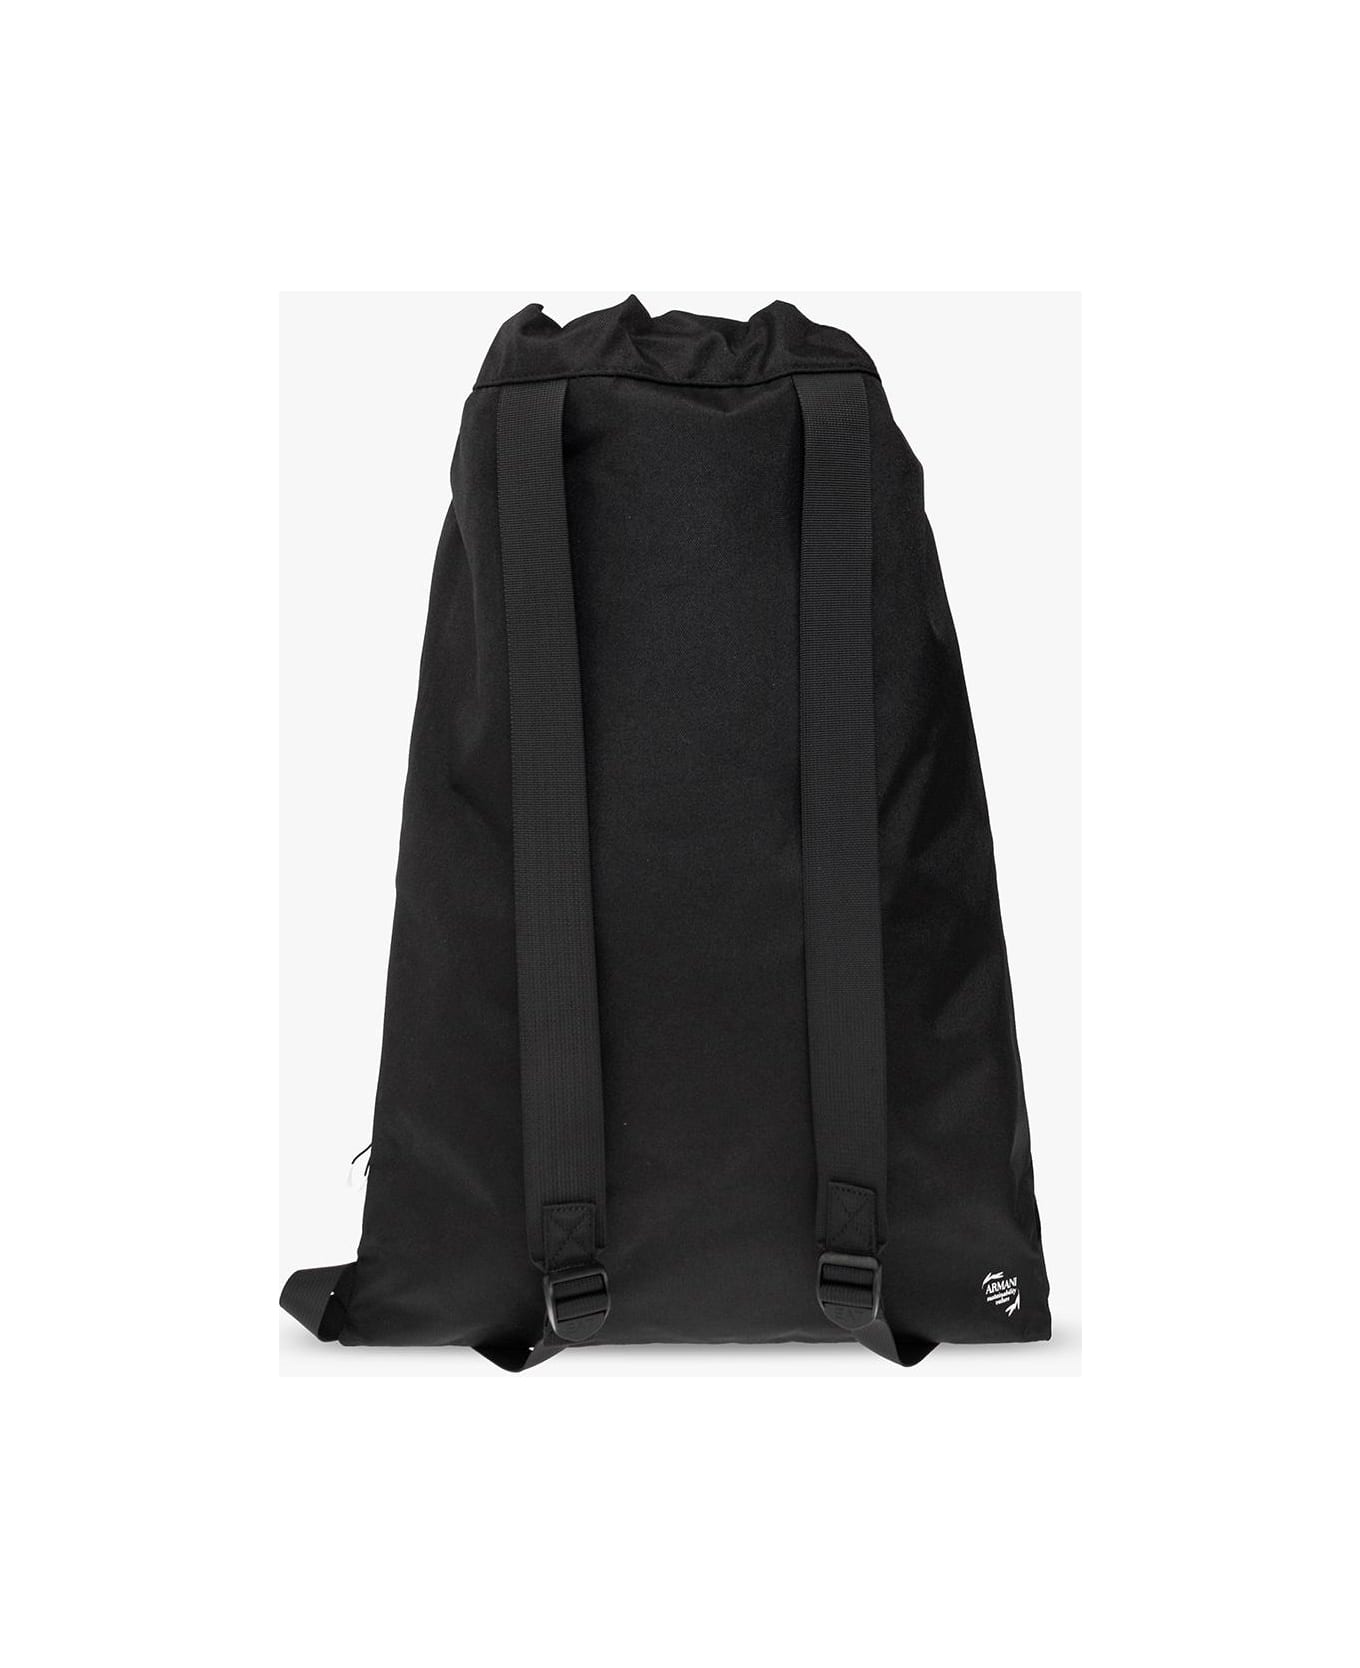 EA7 Emporio Armani 'sustainable' Collection Backpack - Black バックパック